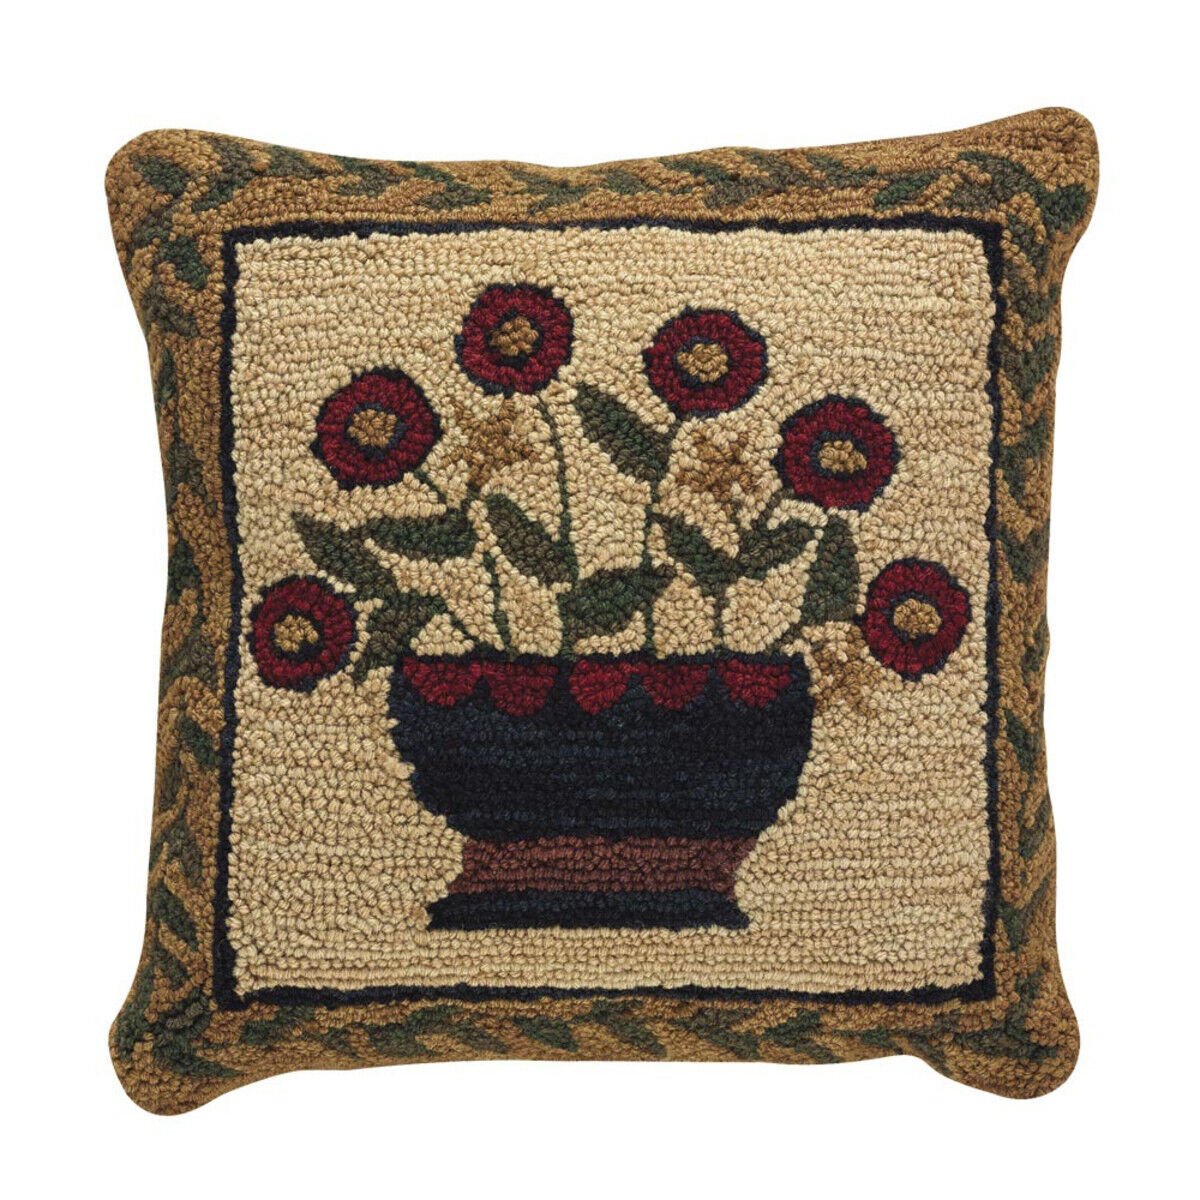 Primitive/Country Folk art Hooked 18&quot; Pillow Flower Basketw/insert - The Primitive Pineapple Collection